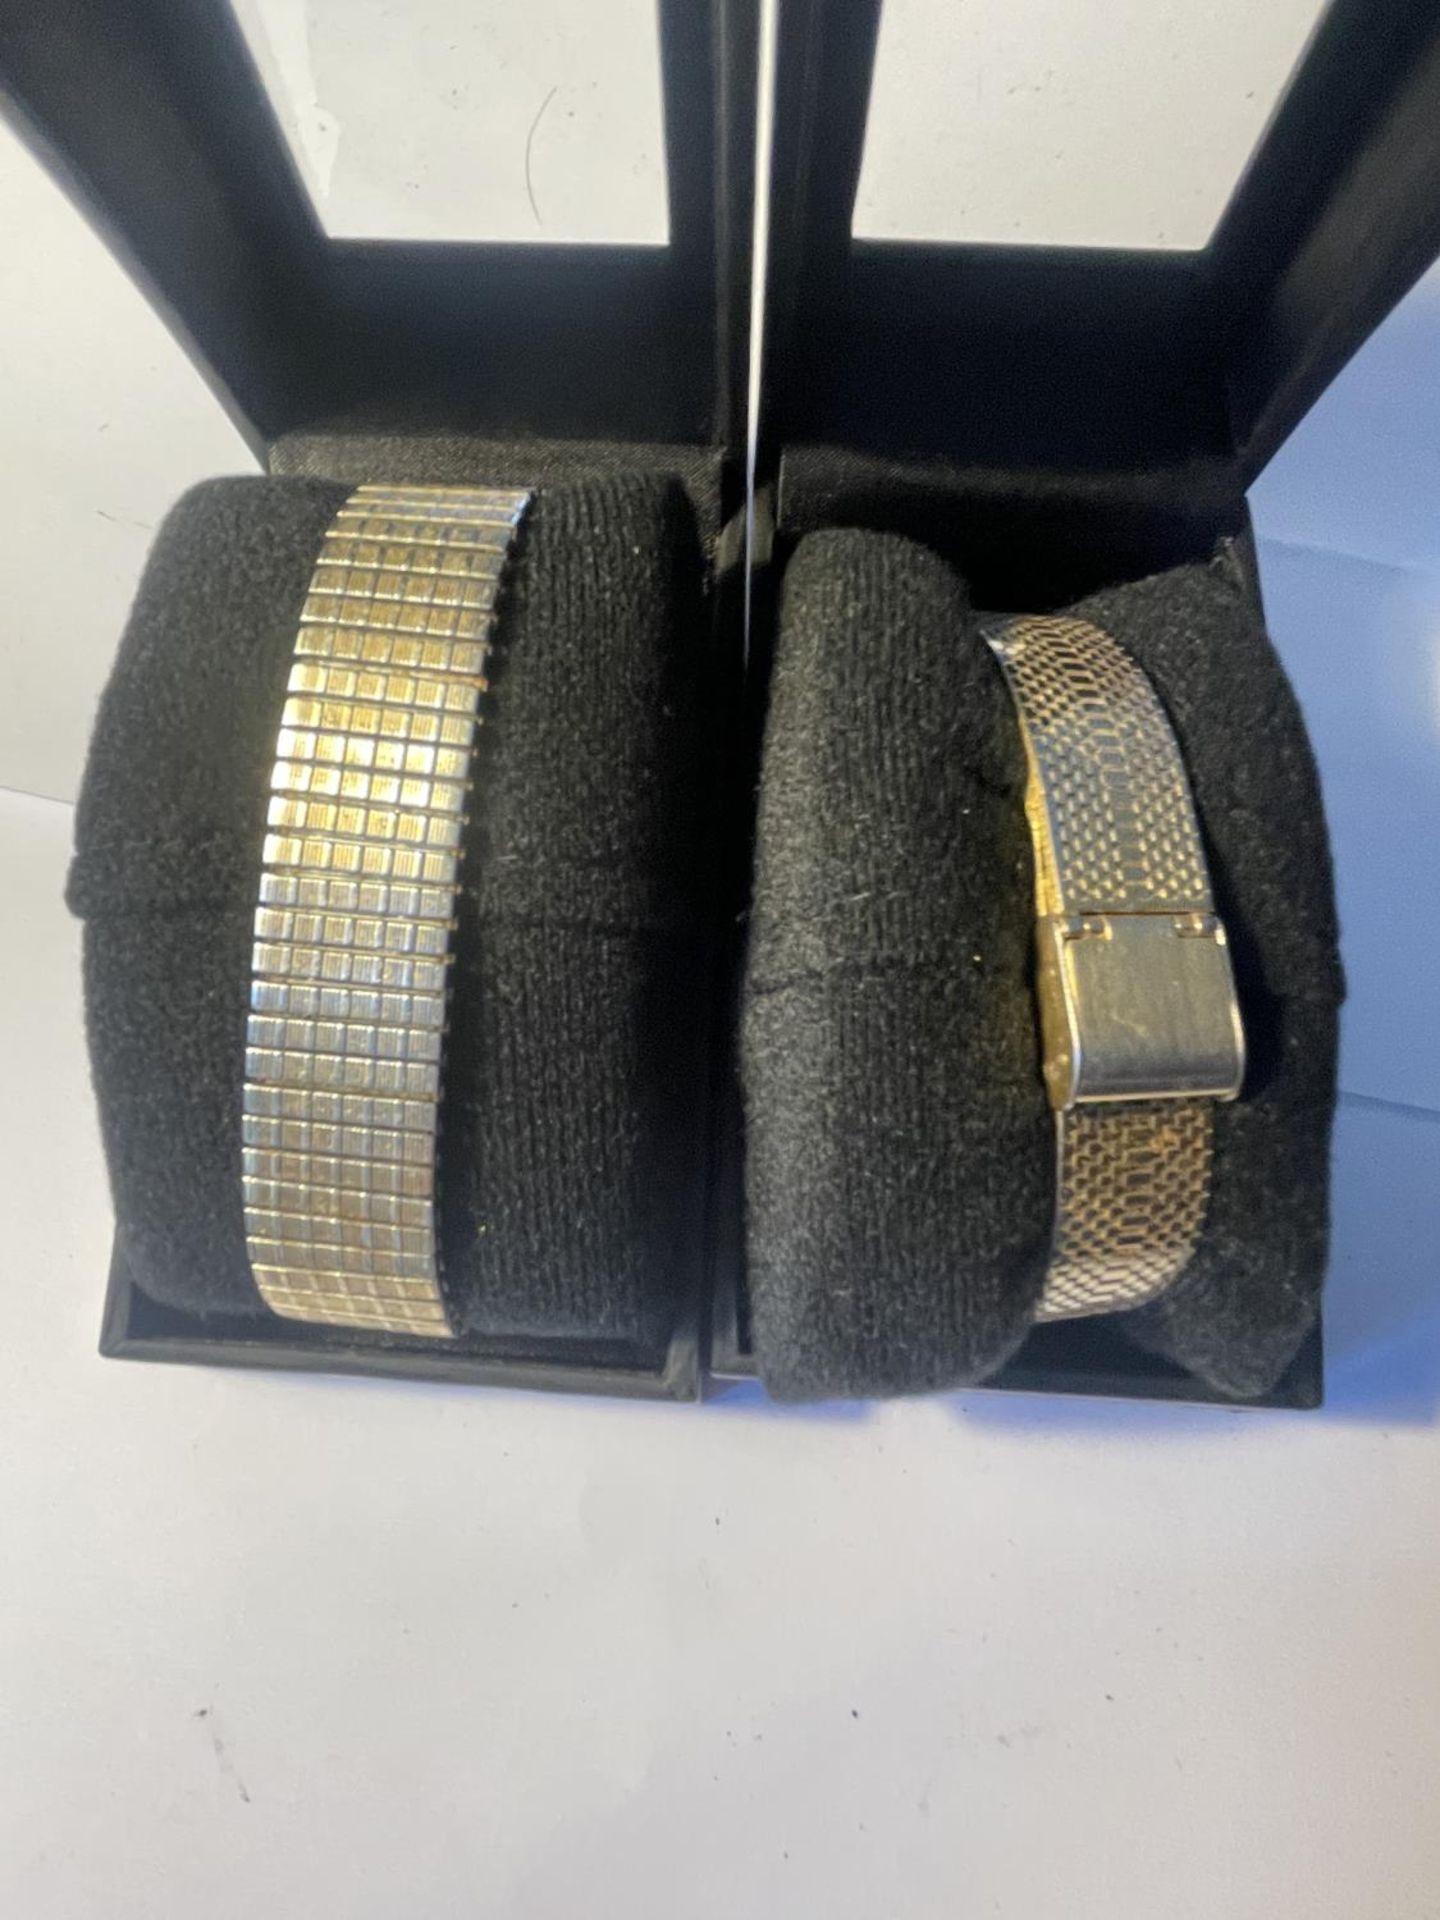 TWO SEKONDA WRIST WATCHES IN PRESENTATION BOXES SEEN WORKING BUT NO WARRANTY - Image 4 of 4